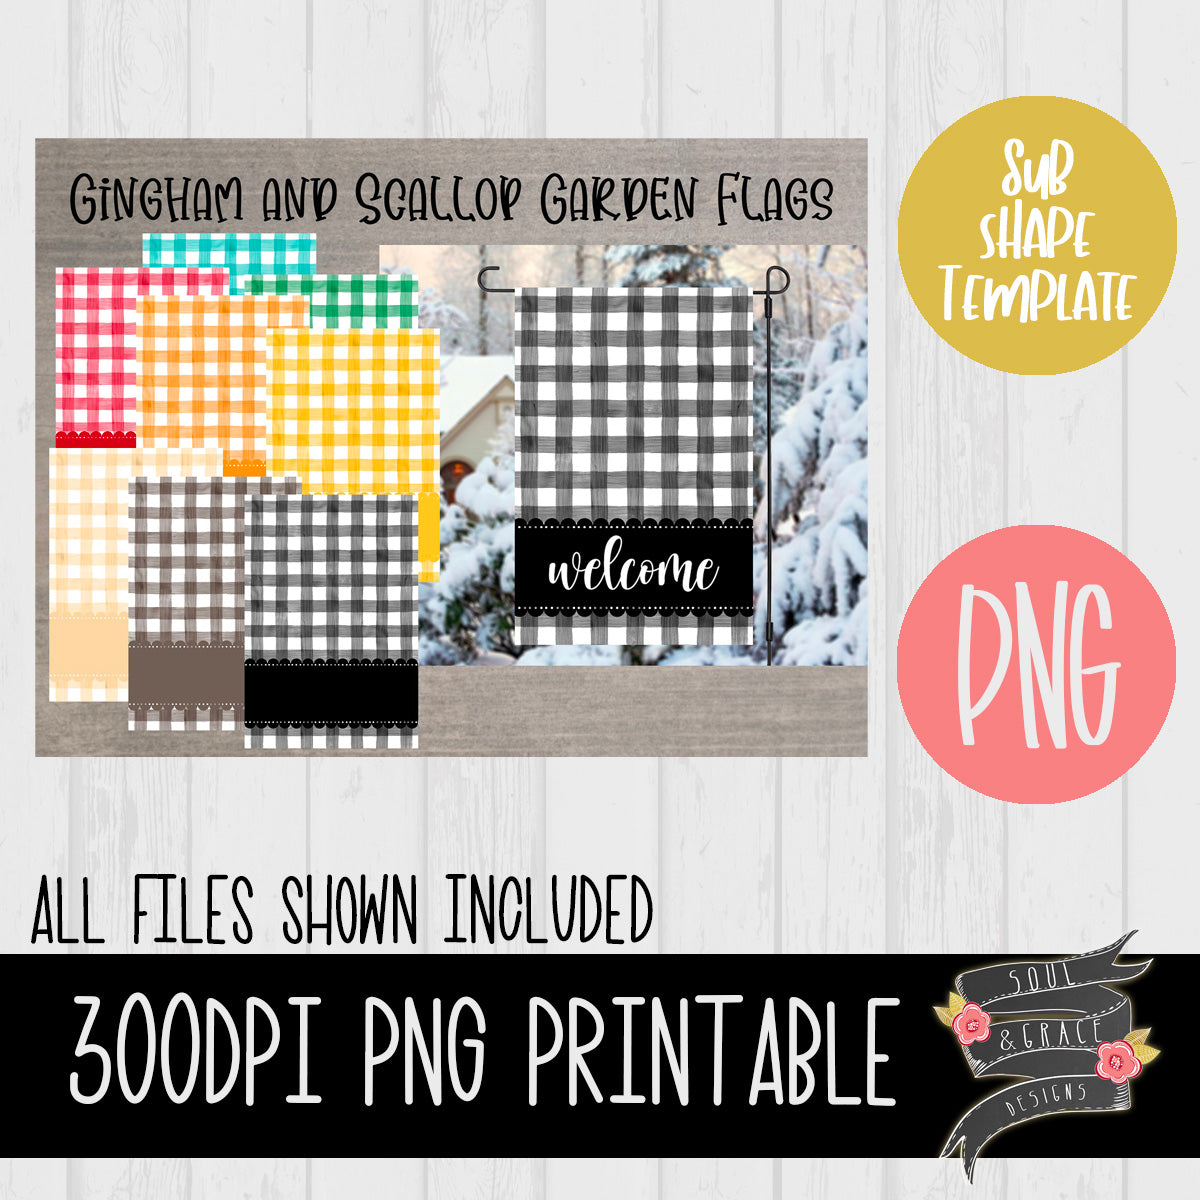 Gingham and Scallop Garden Flag Sublimation Template Set